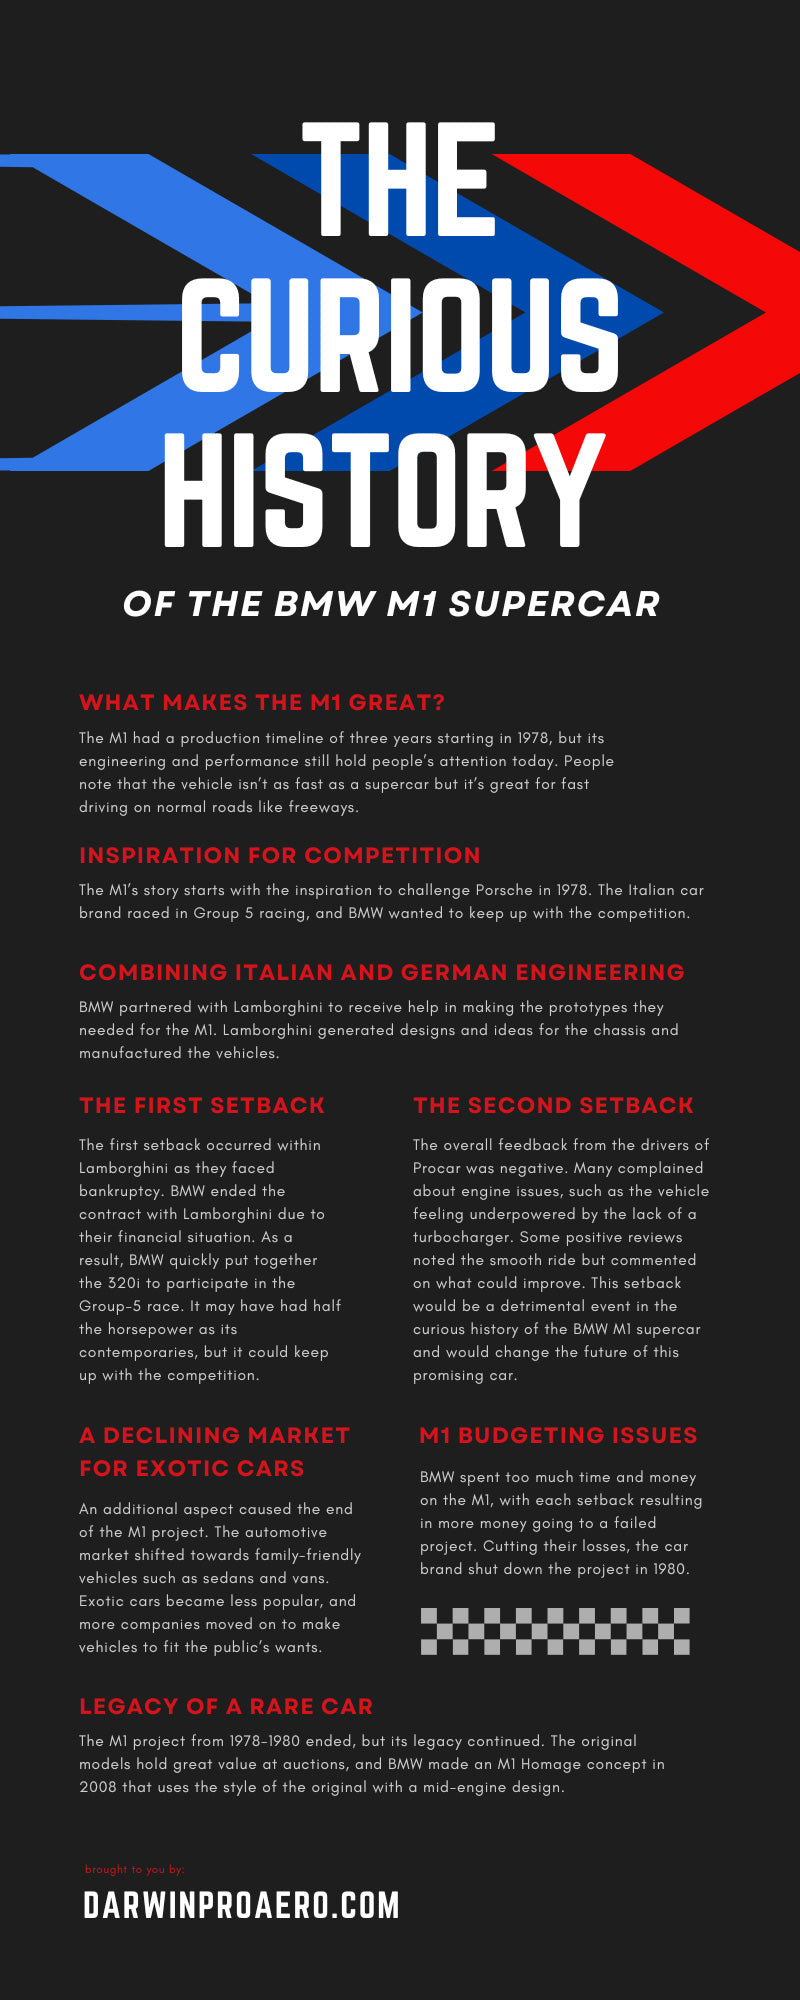 The Curious History of the BMW M1 Supercar